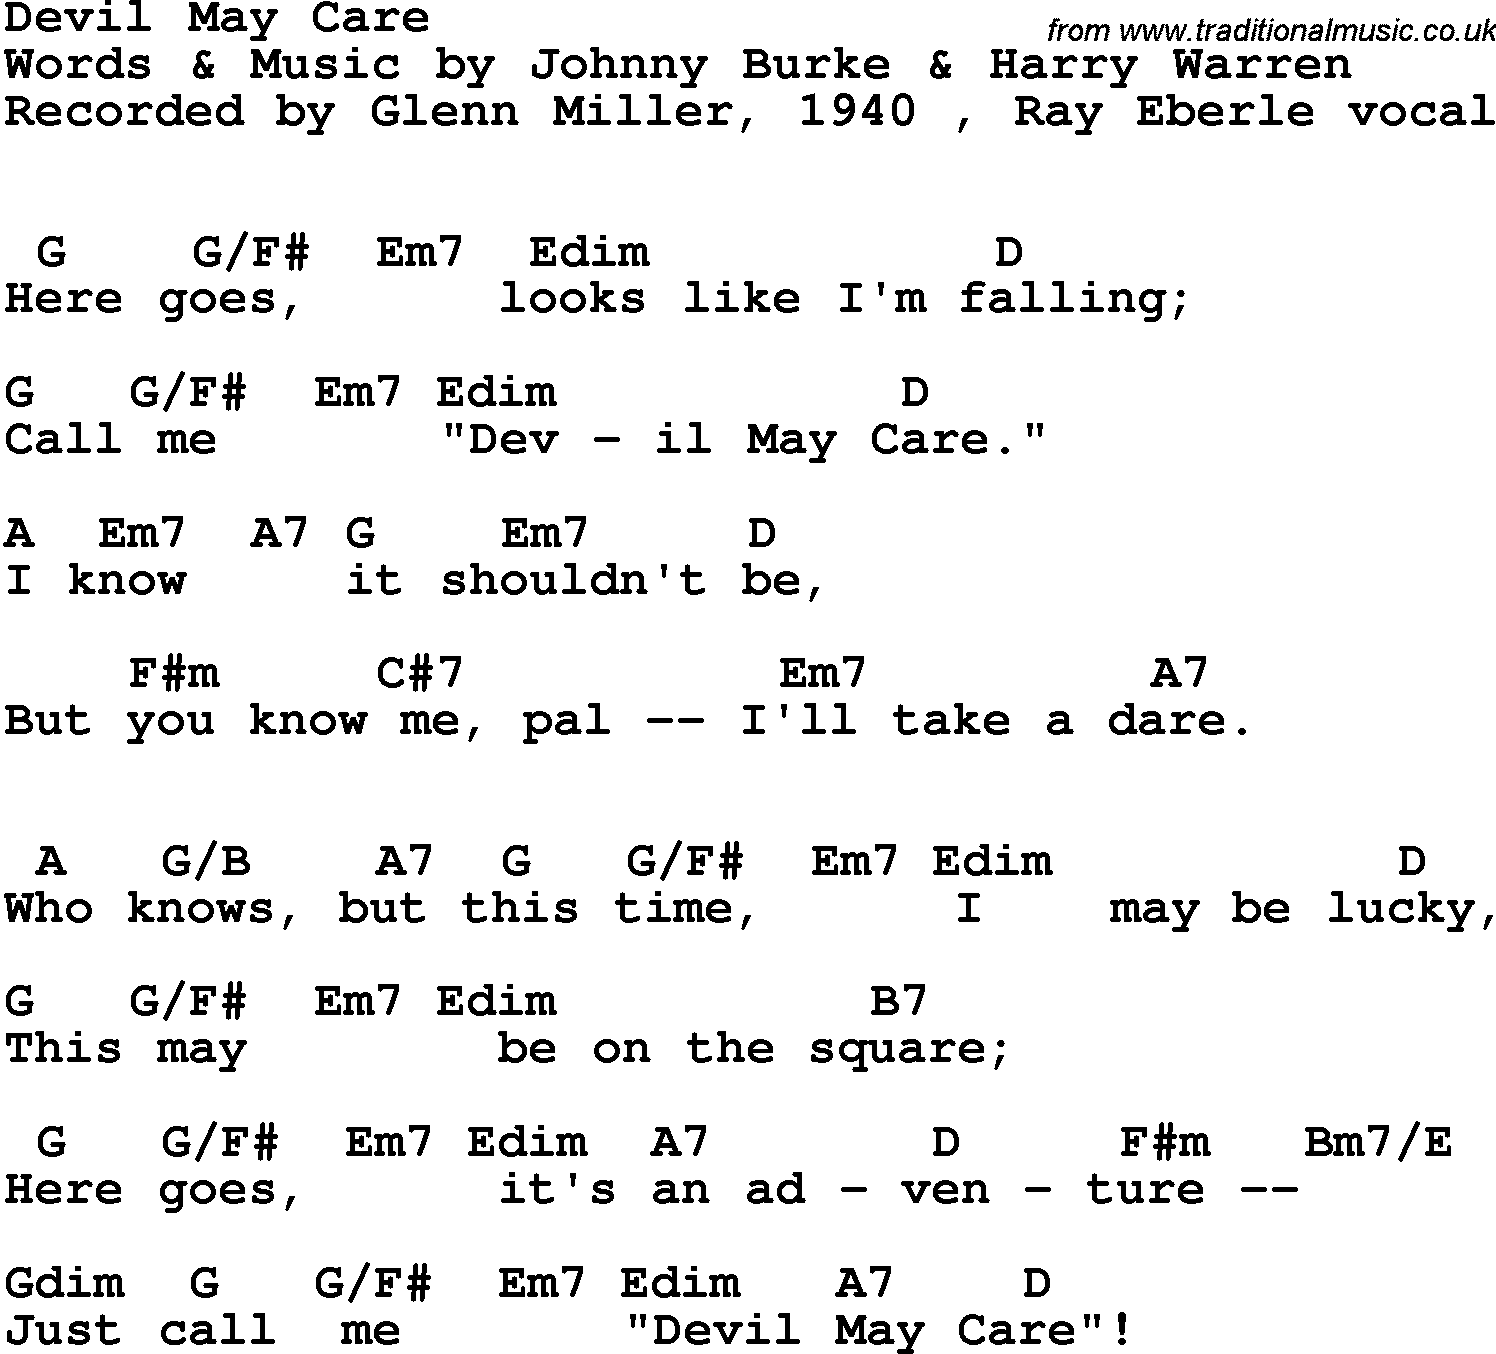 Song Lyrics with guitar chords for Devil May Care - Glenn Miller, 1940, Ray Eberle Vocal